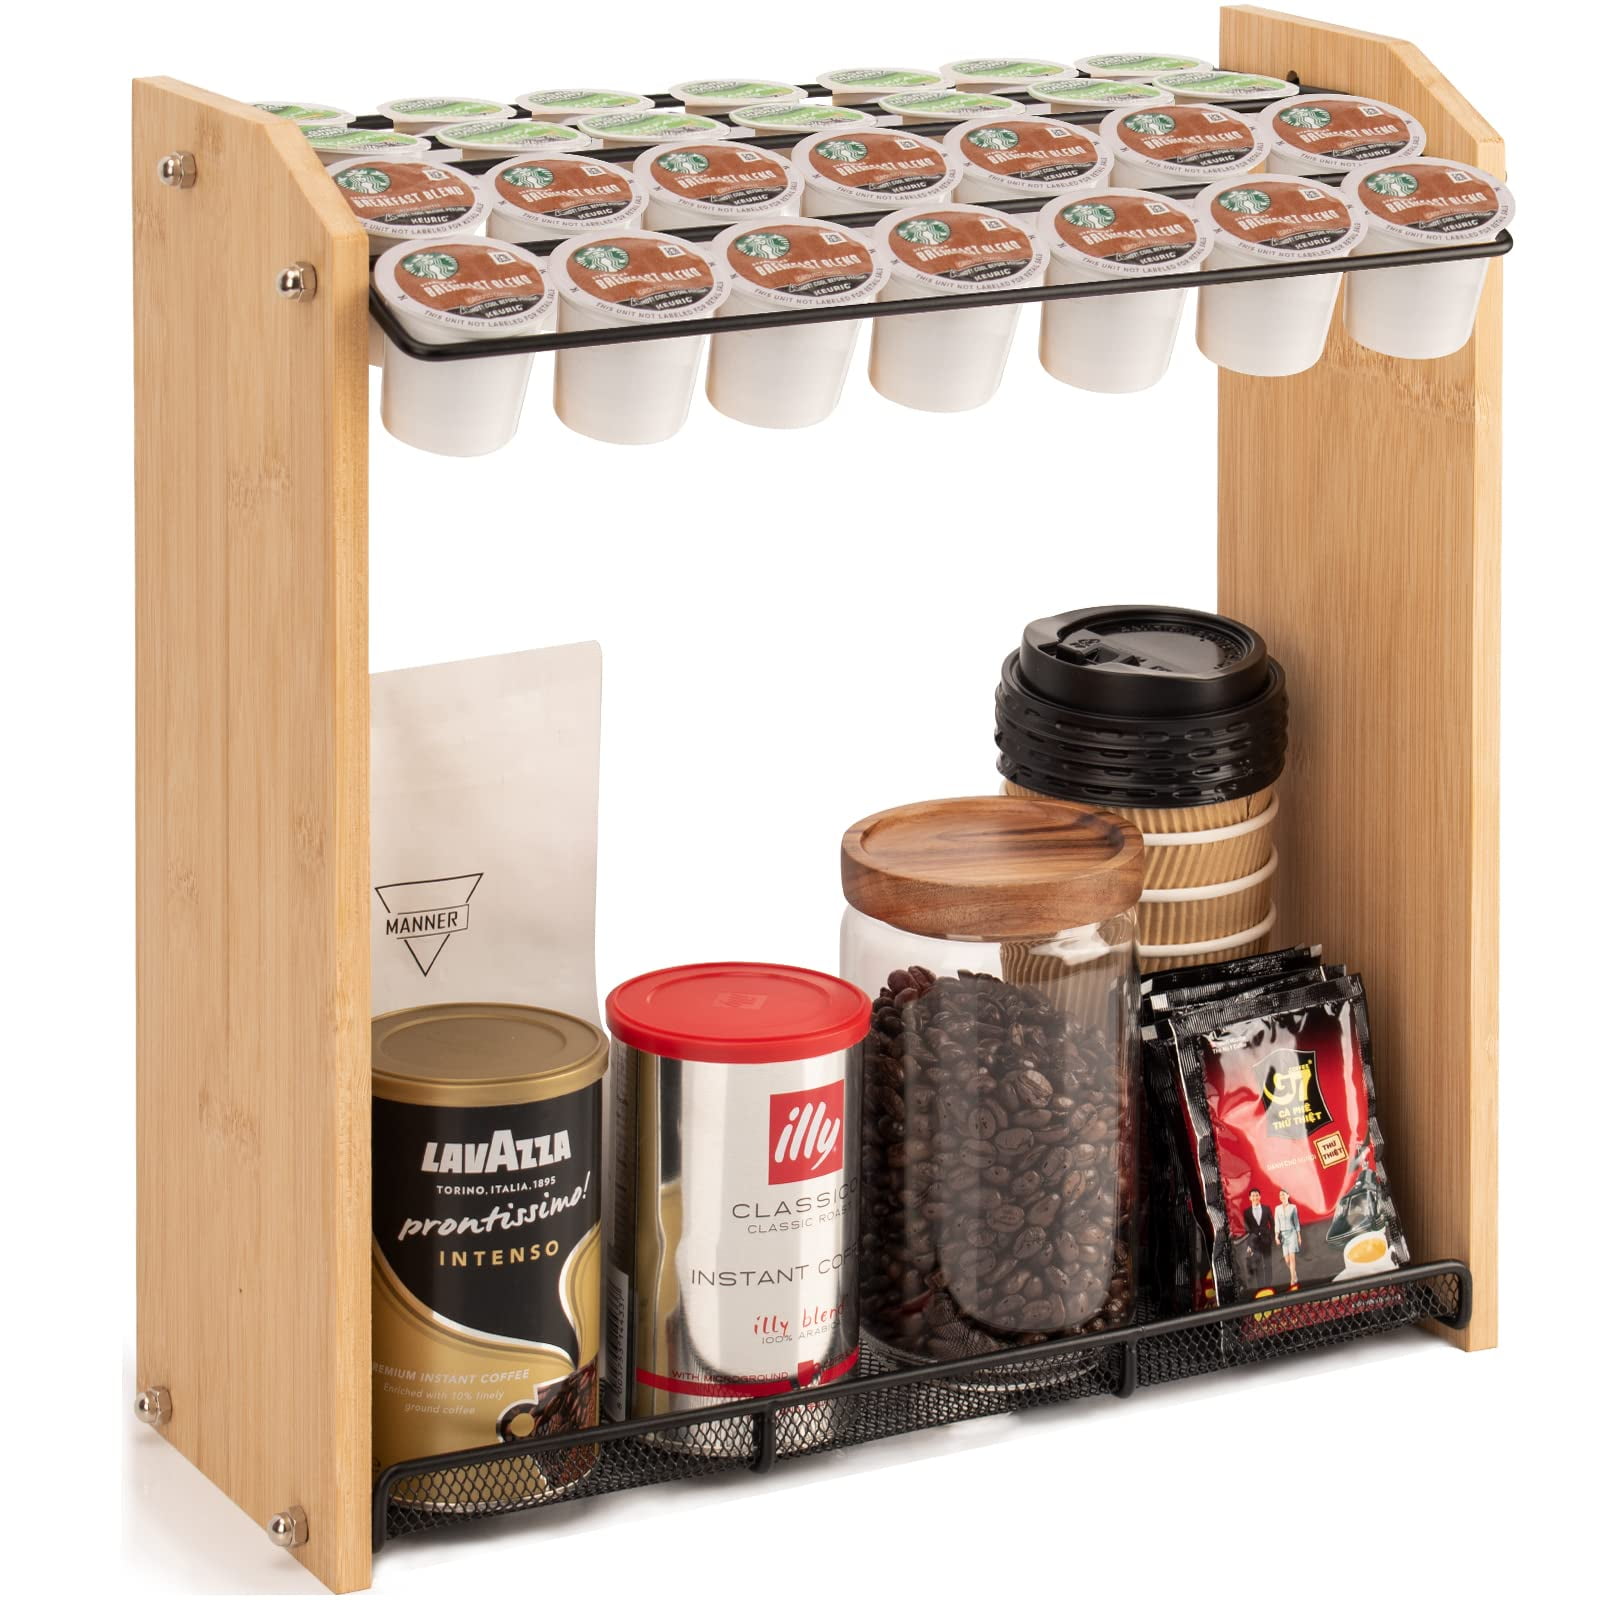 Coffee Bar Accessories and Organizer Countertop, Coffee Station Organizer  with Drawer Wood Kitchen Countertop Organizer, Coffee Syrup and Snack